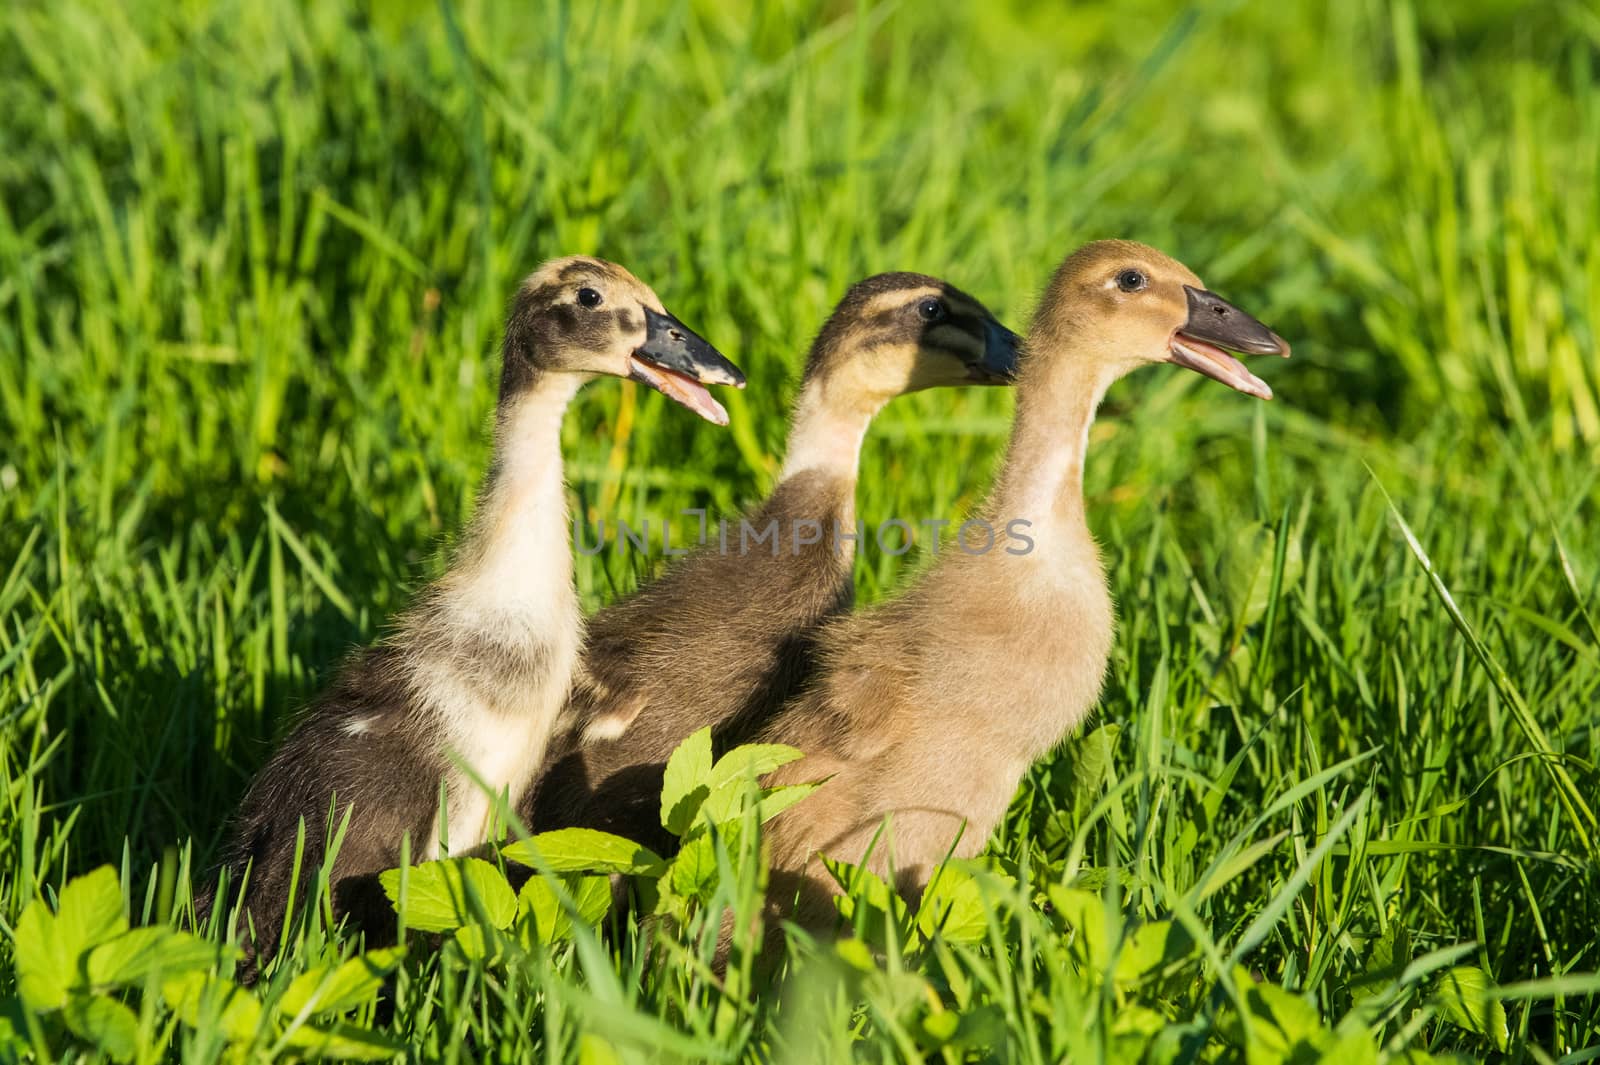 Three Little domestic gray duckling sitting in green grass.